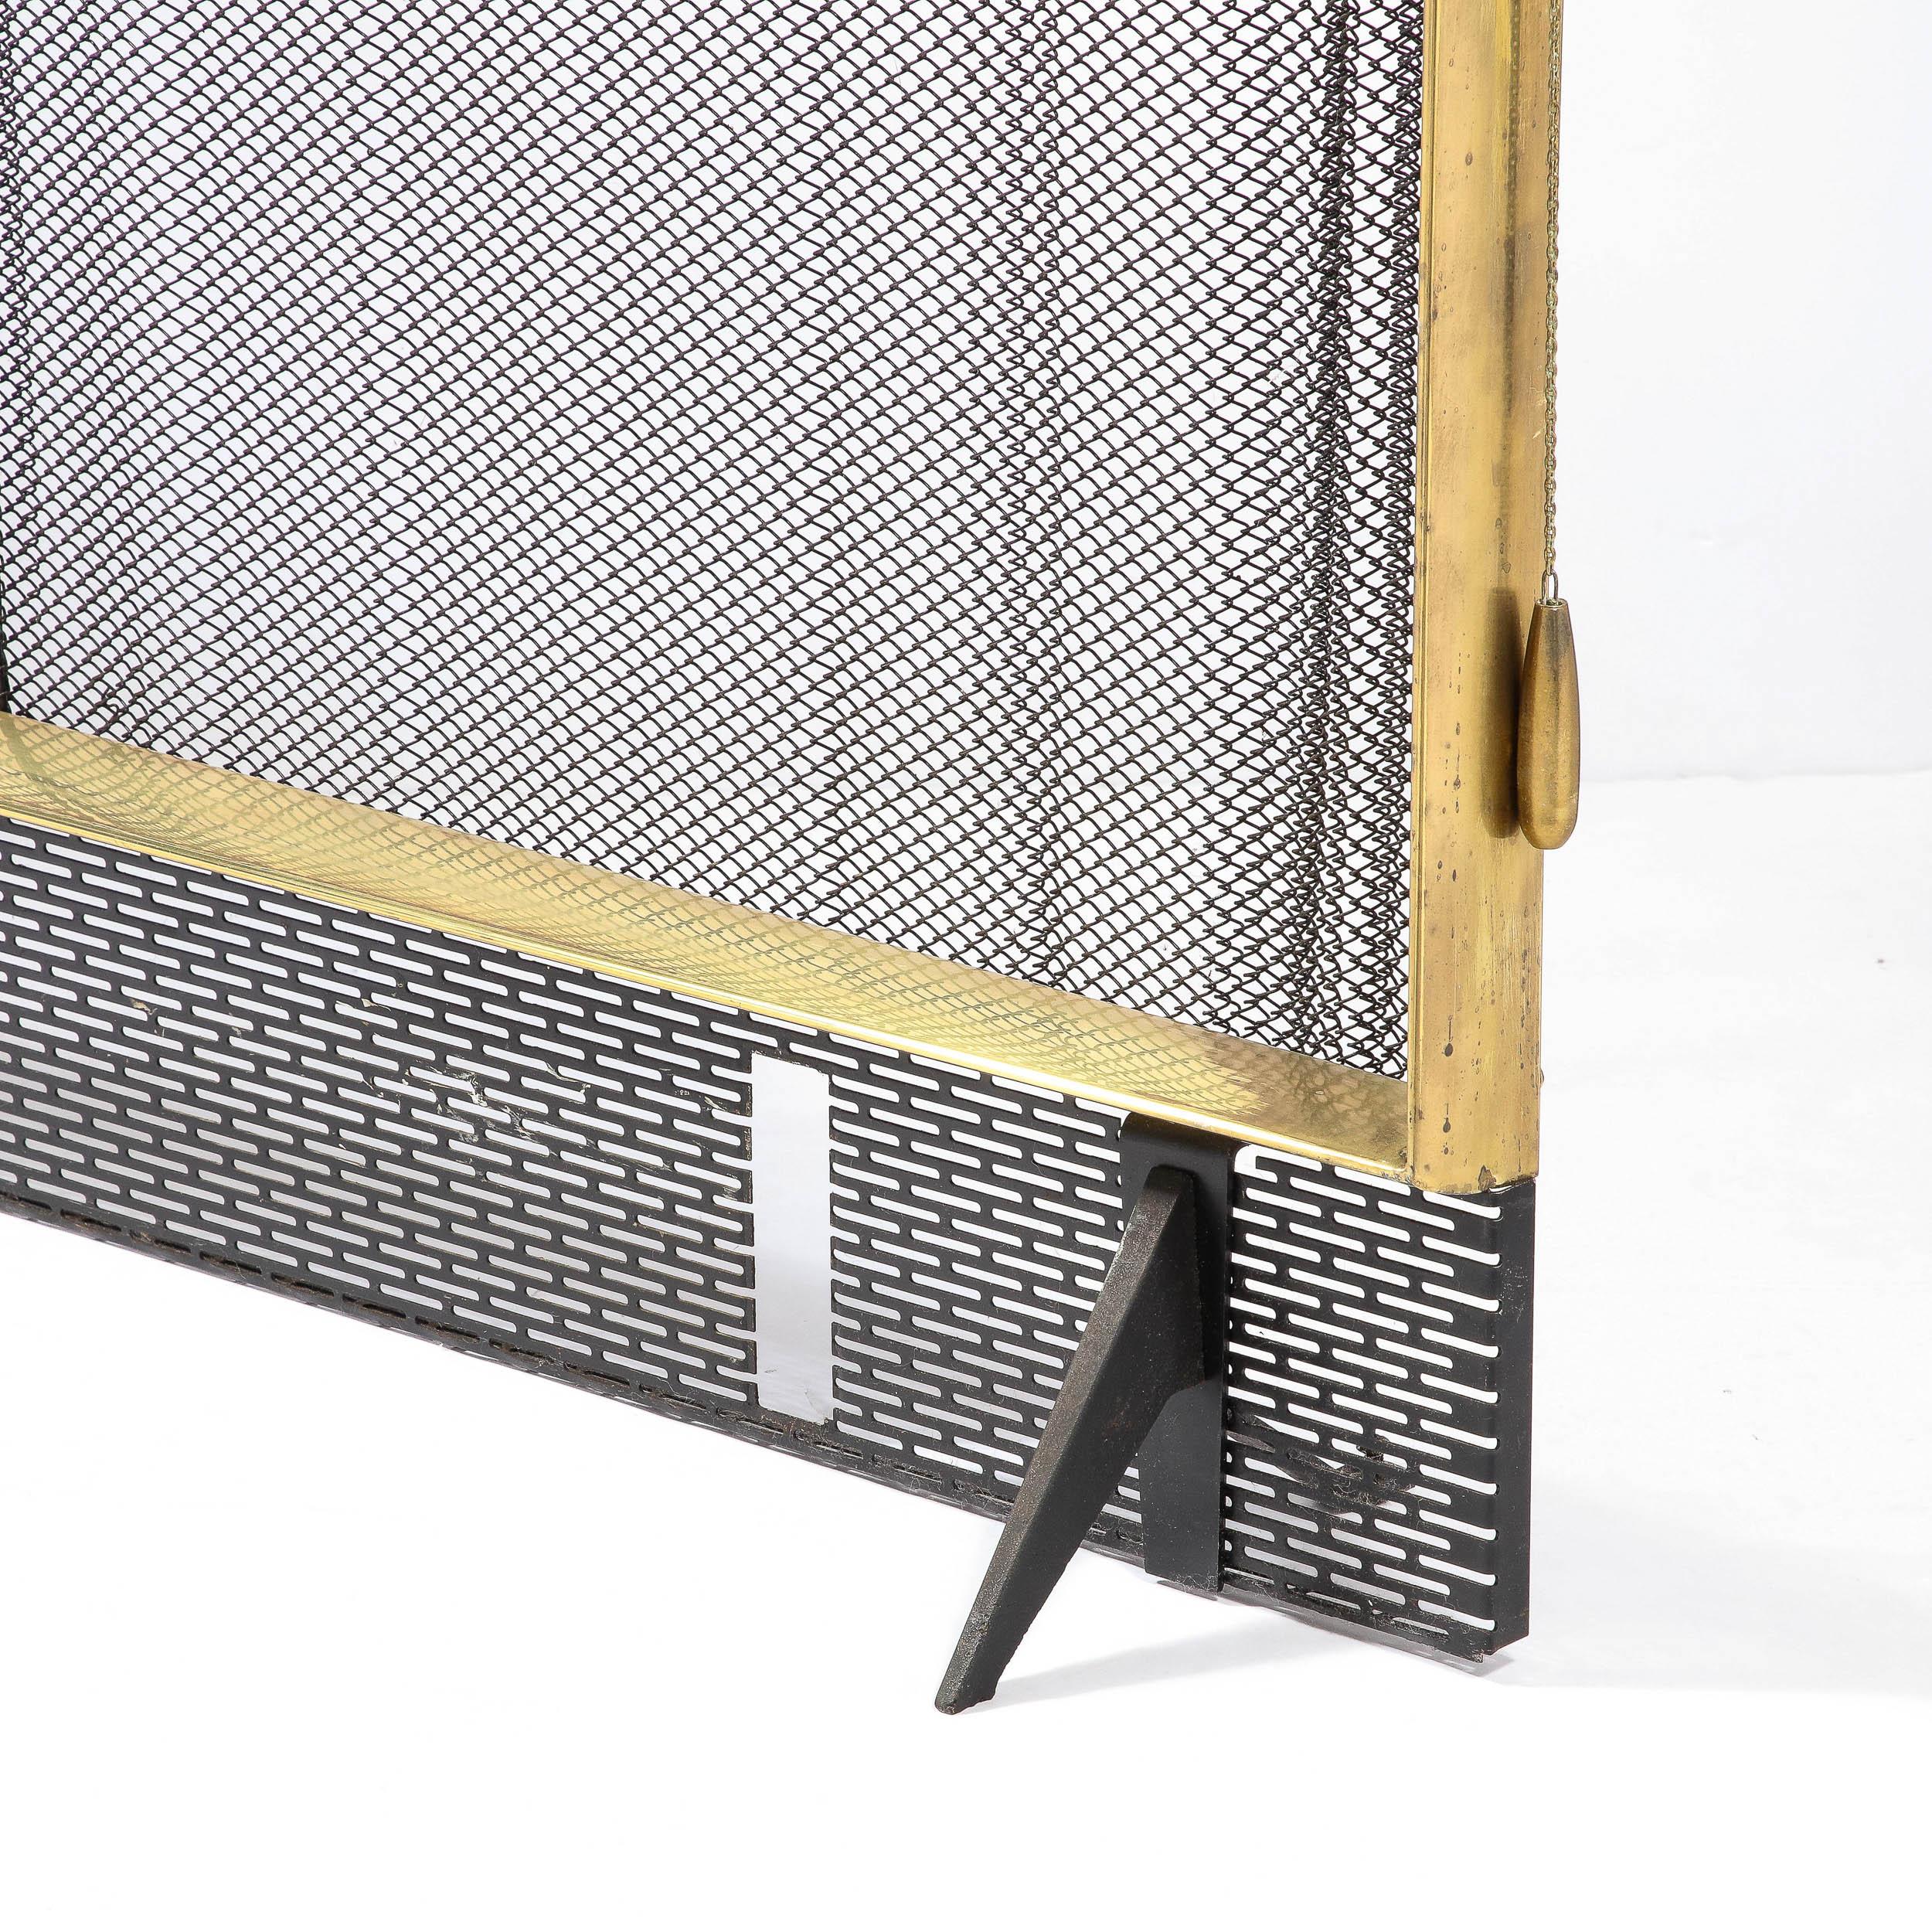 Exceptional Midcentury Fire Screen by Donald Deskey for Bennett 1